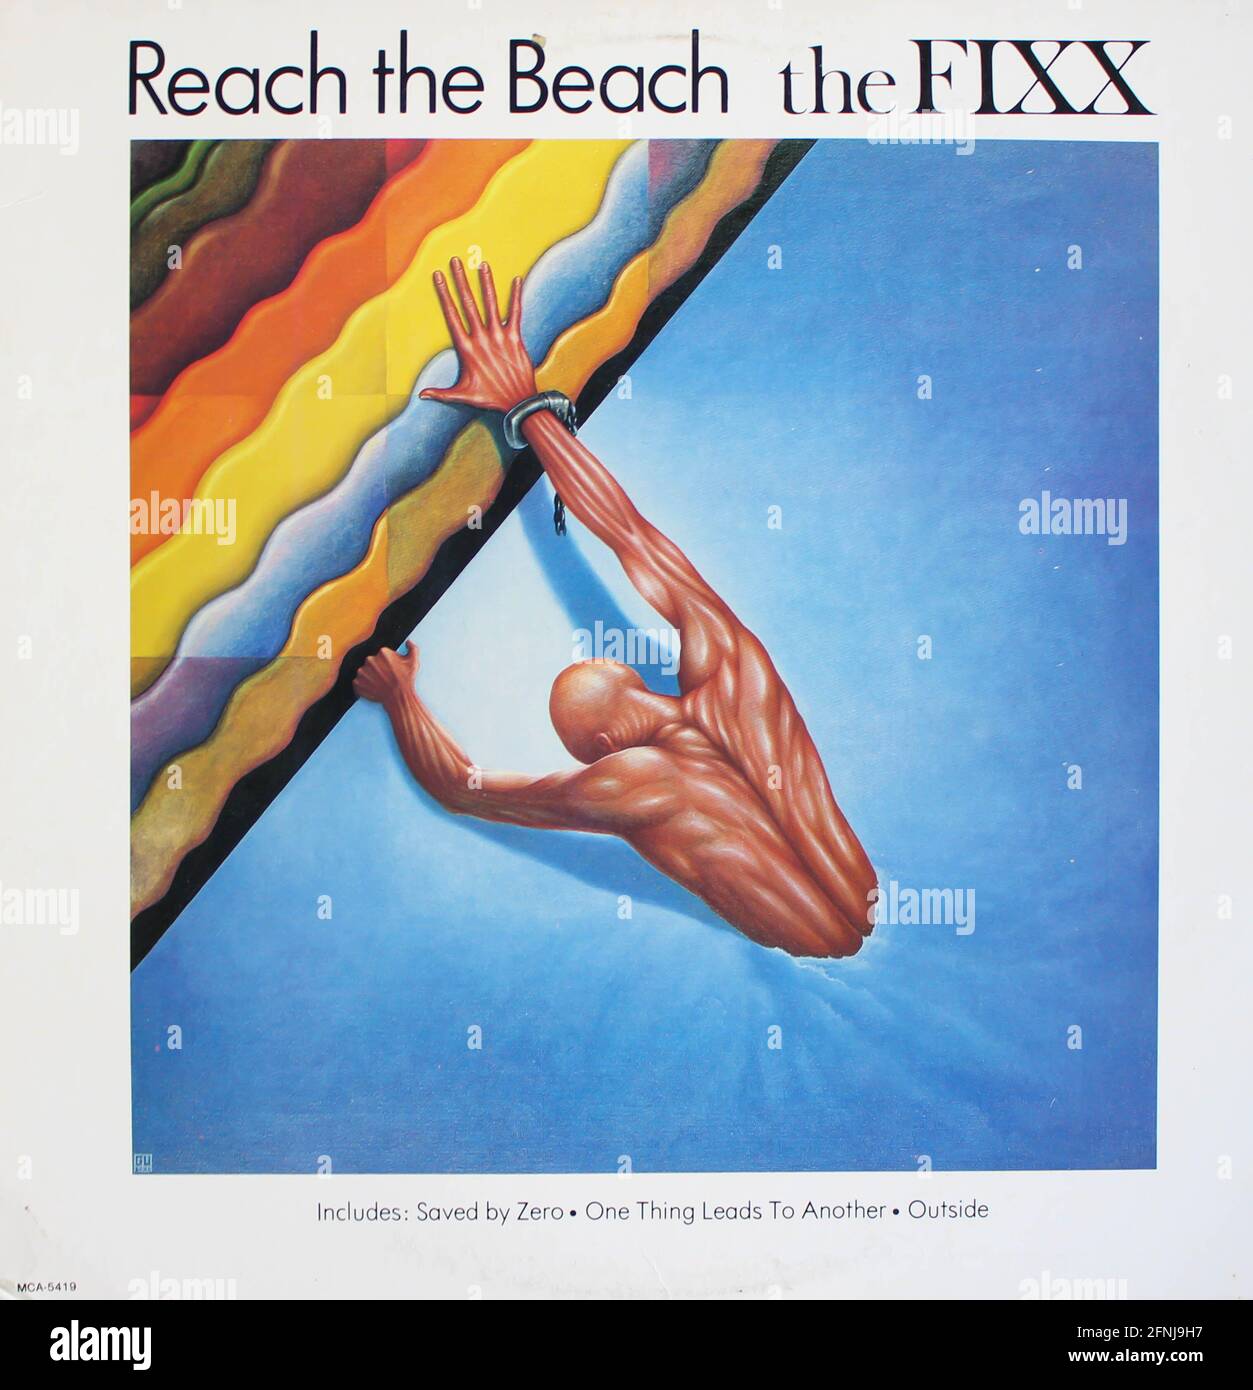 New wave and art rock band, The Fixx music album on vinyl record LP disc. Titled: Reach the beach album cover Stock Photo